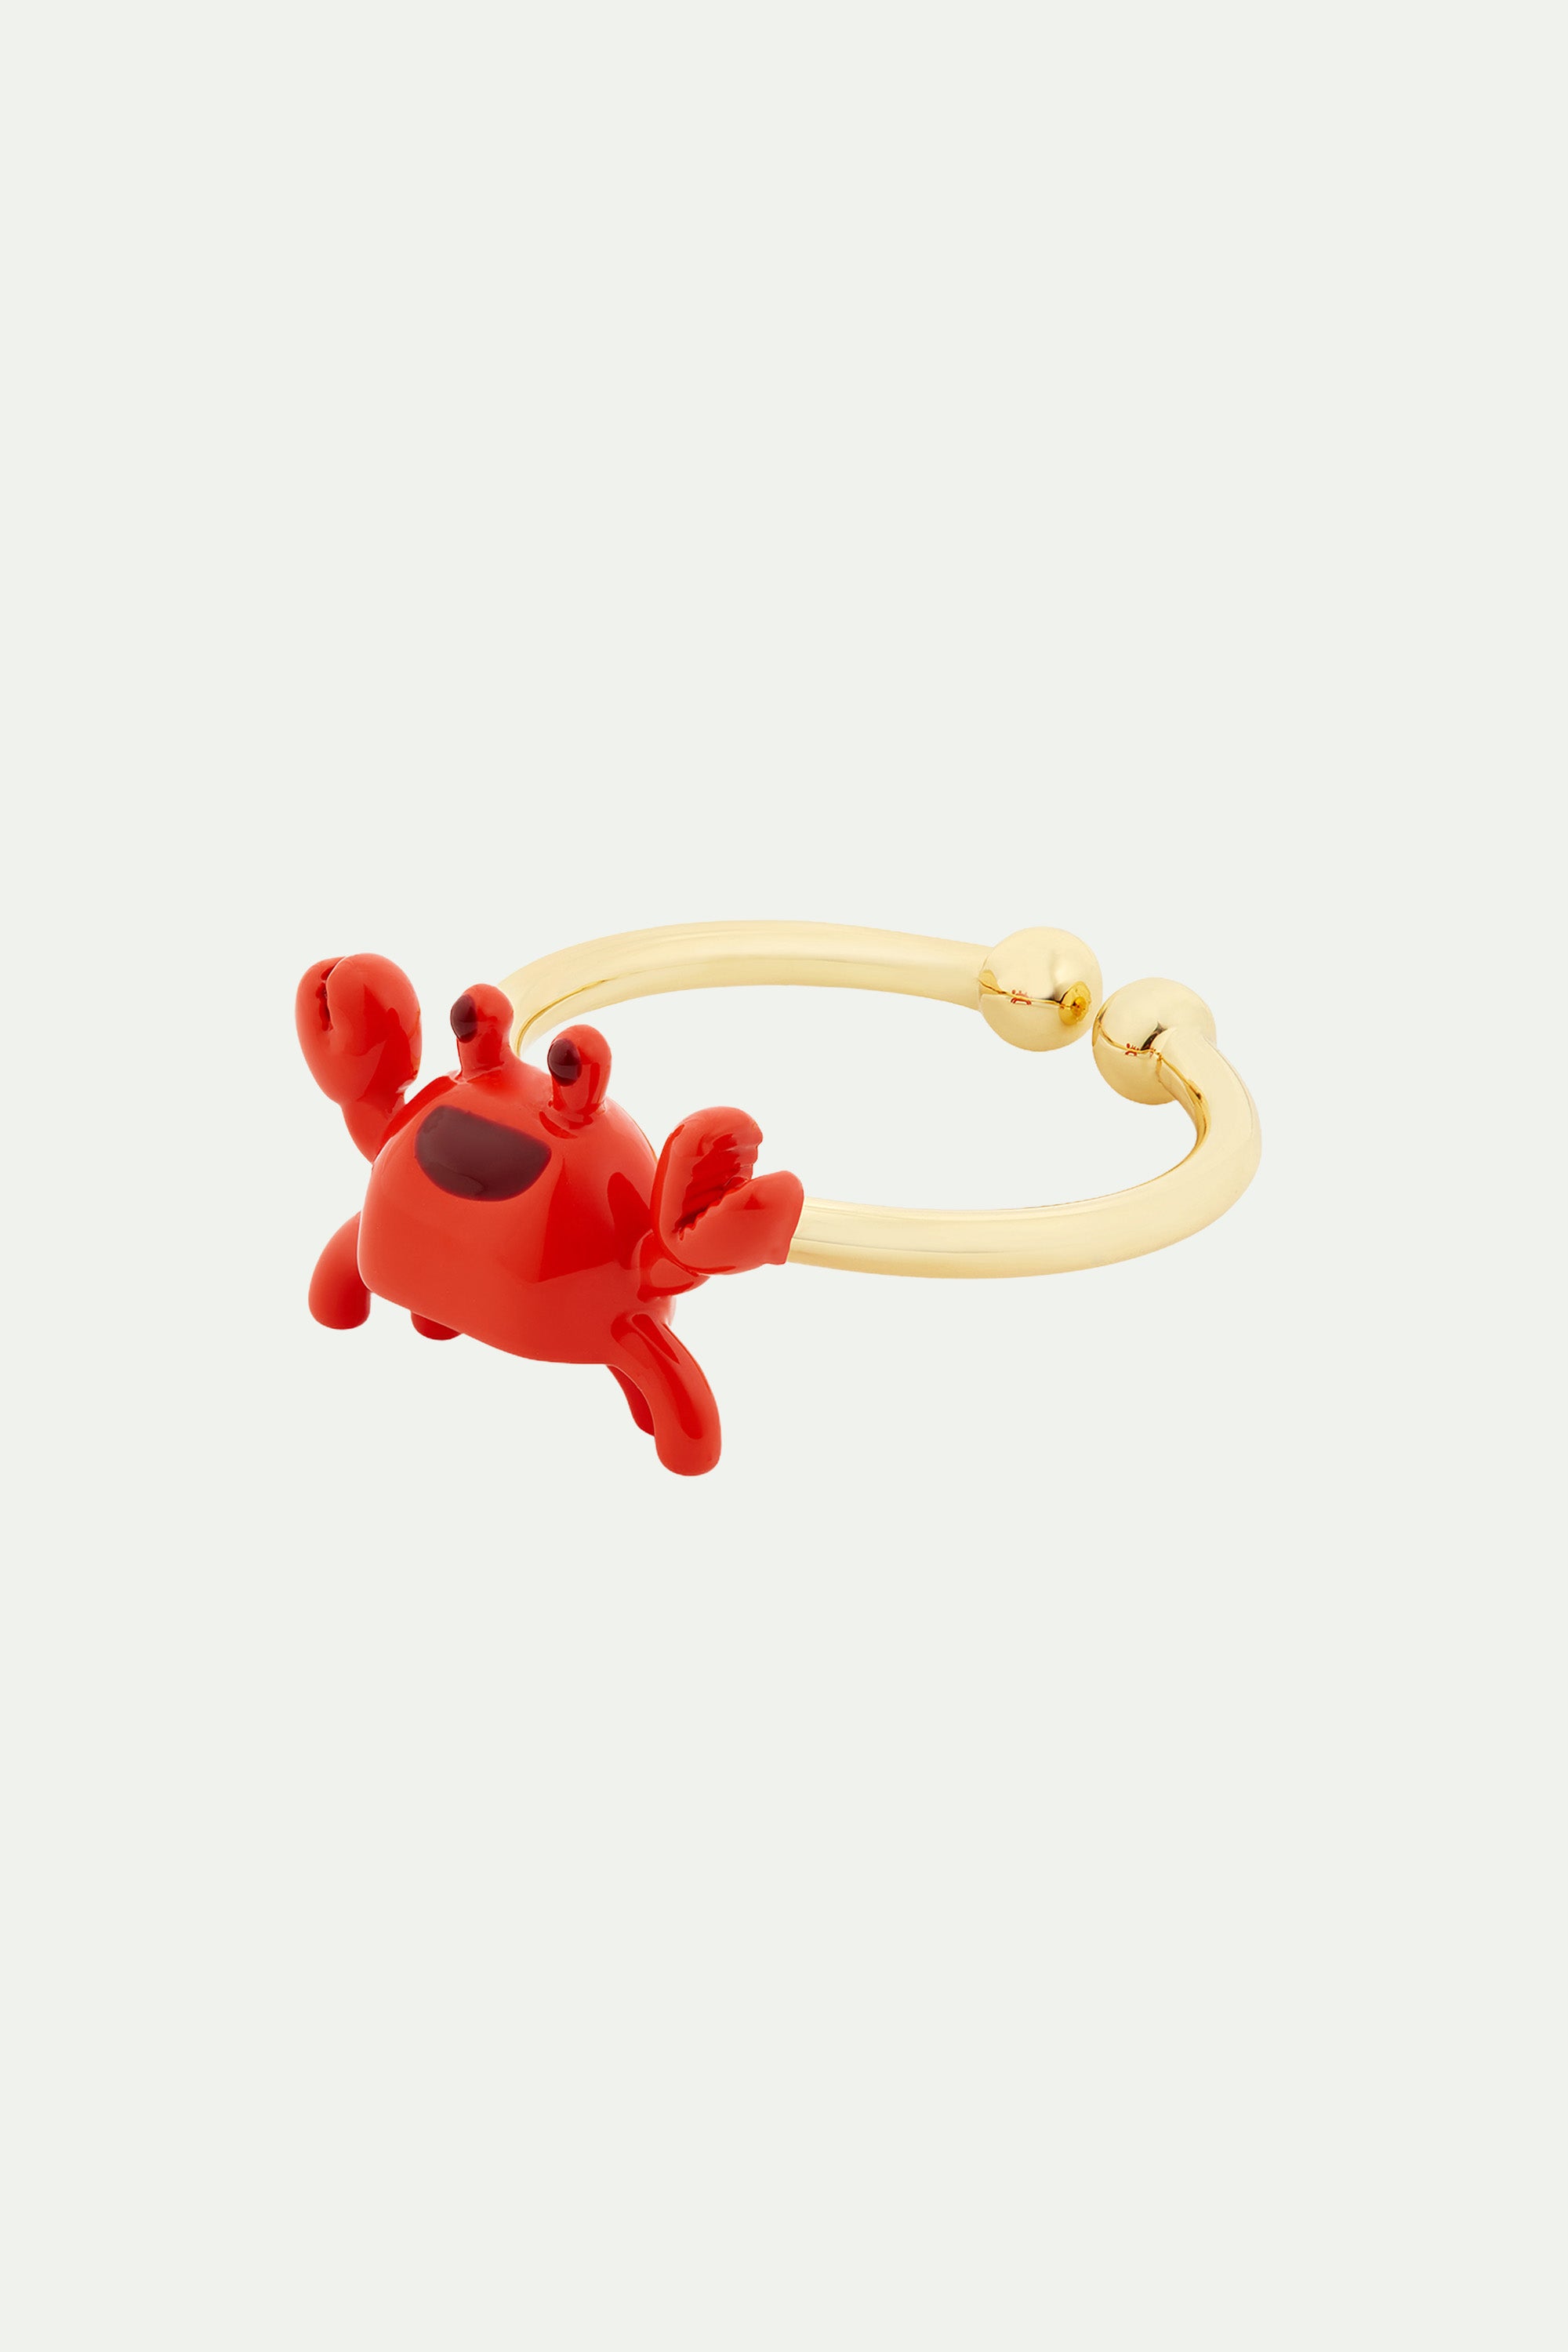 Bague ajustable crabe rouge